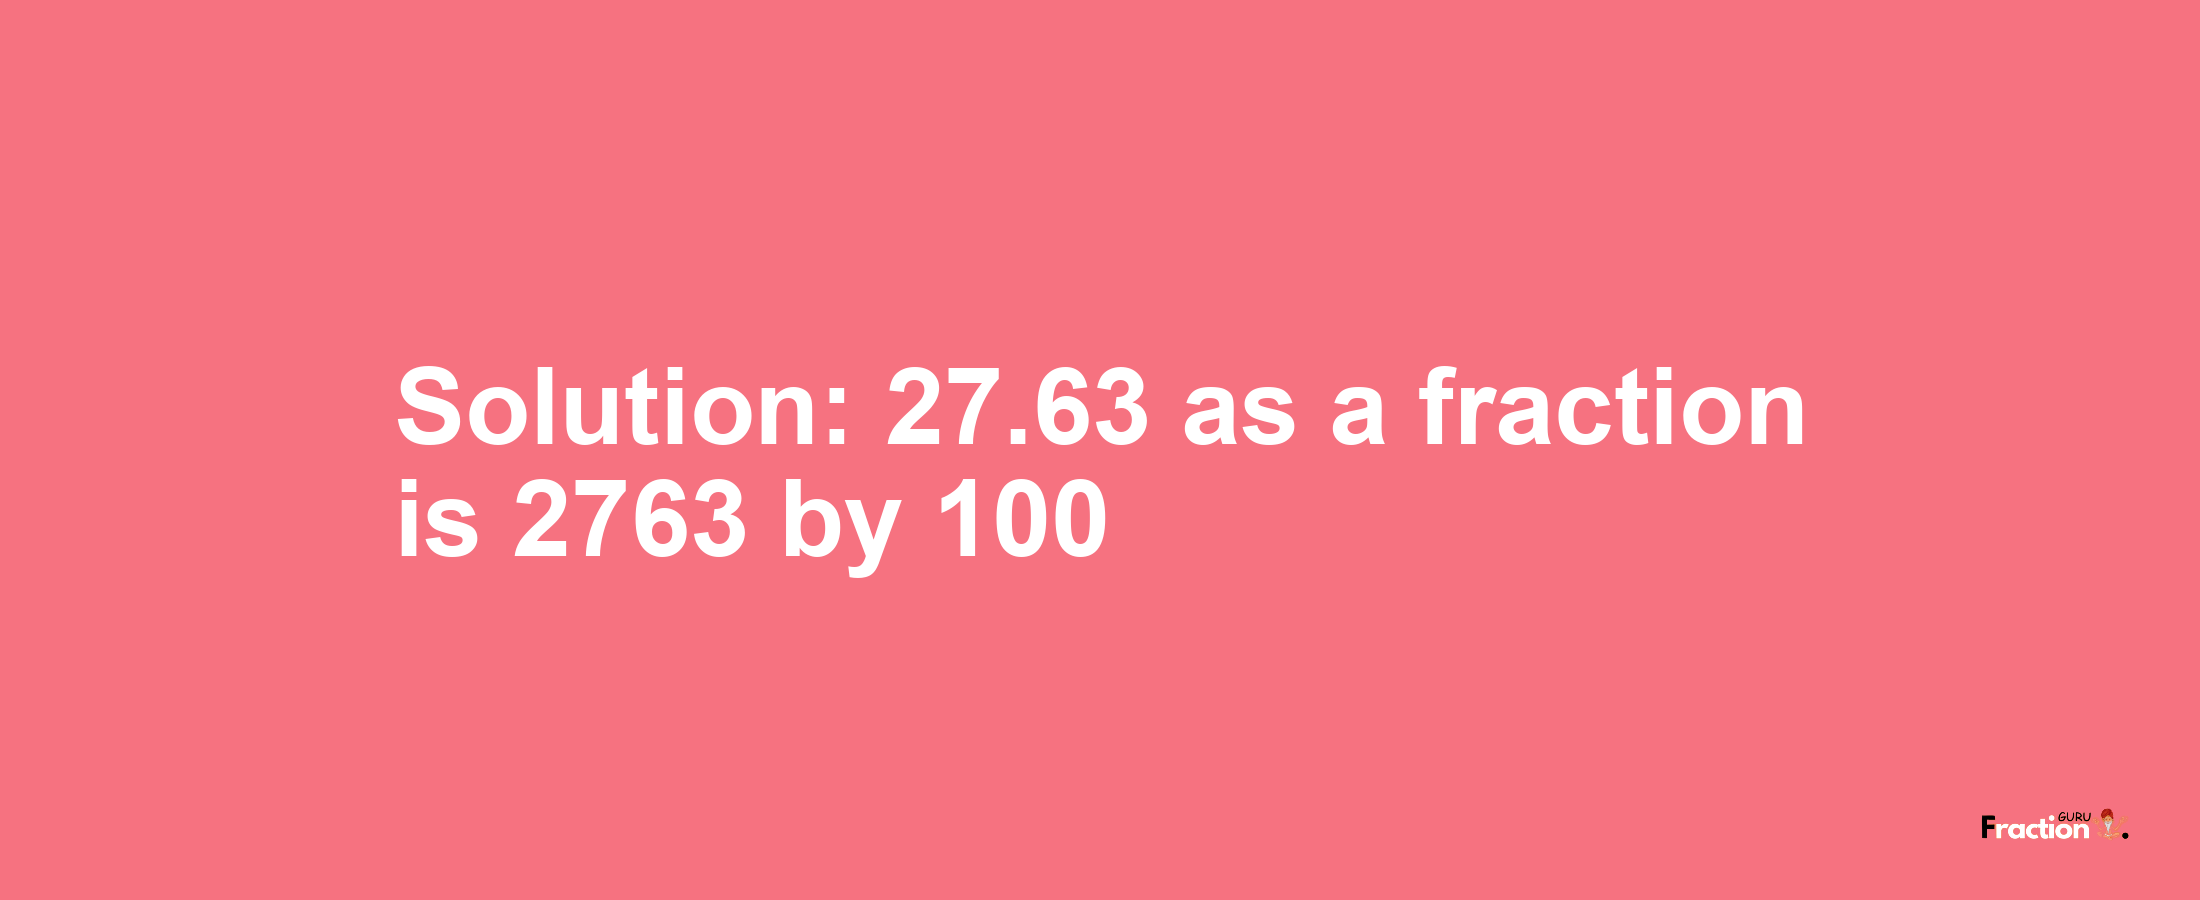 Solution:27.63 as a fraction is 2763/100